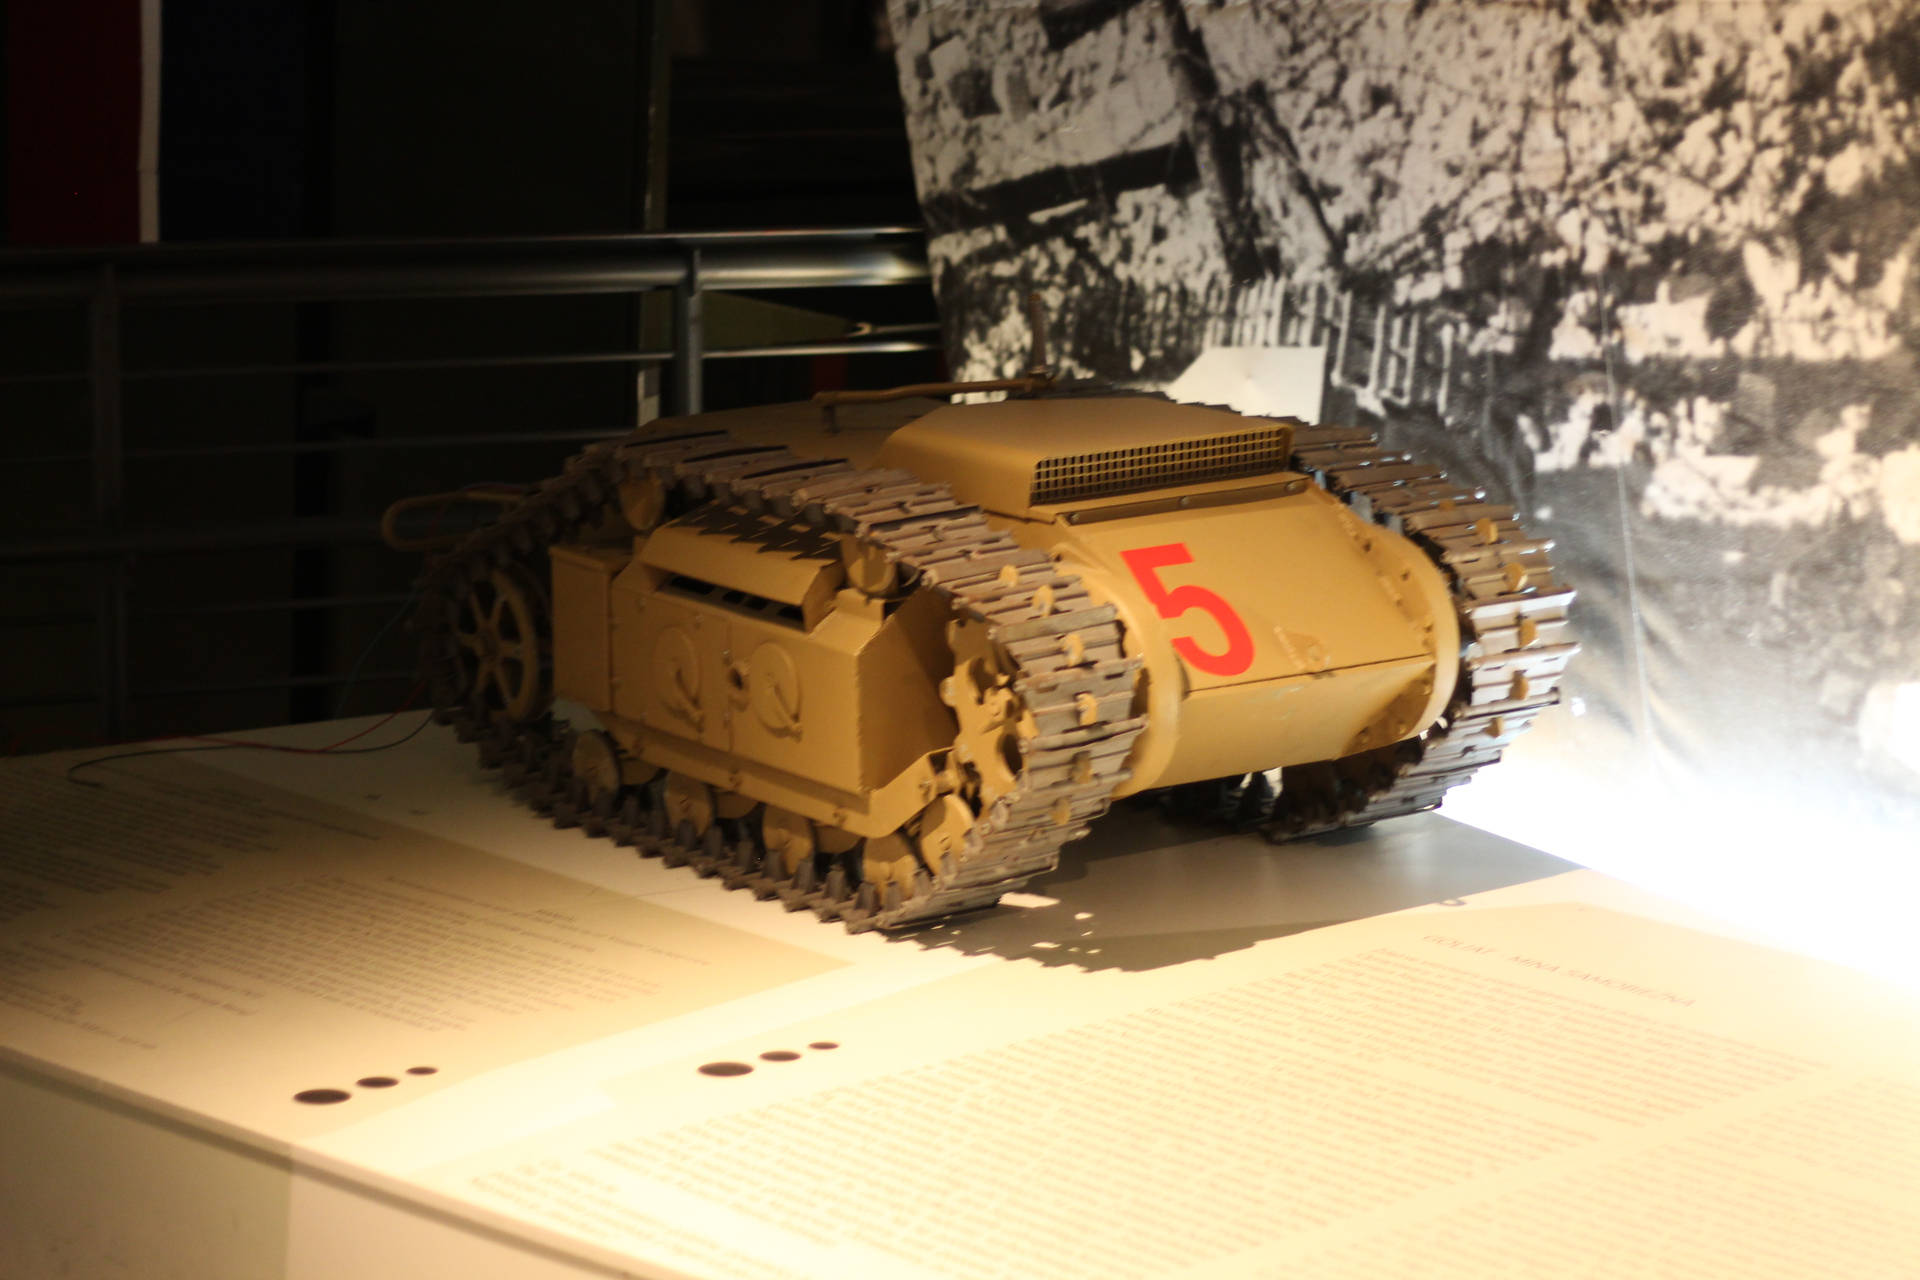 Poland's Goliath Tracked Mine In Action